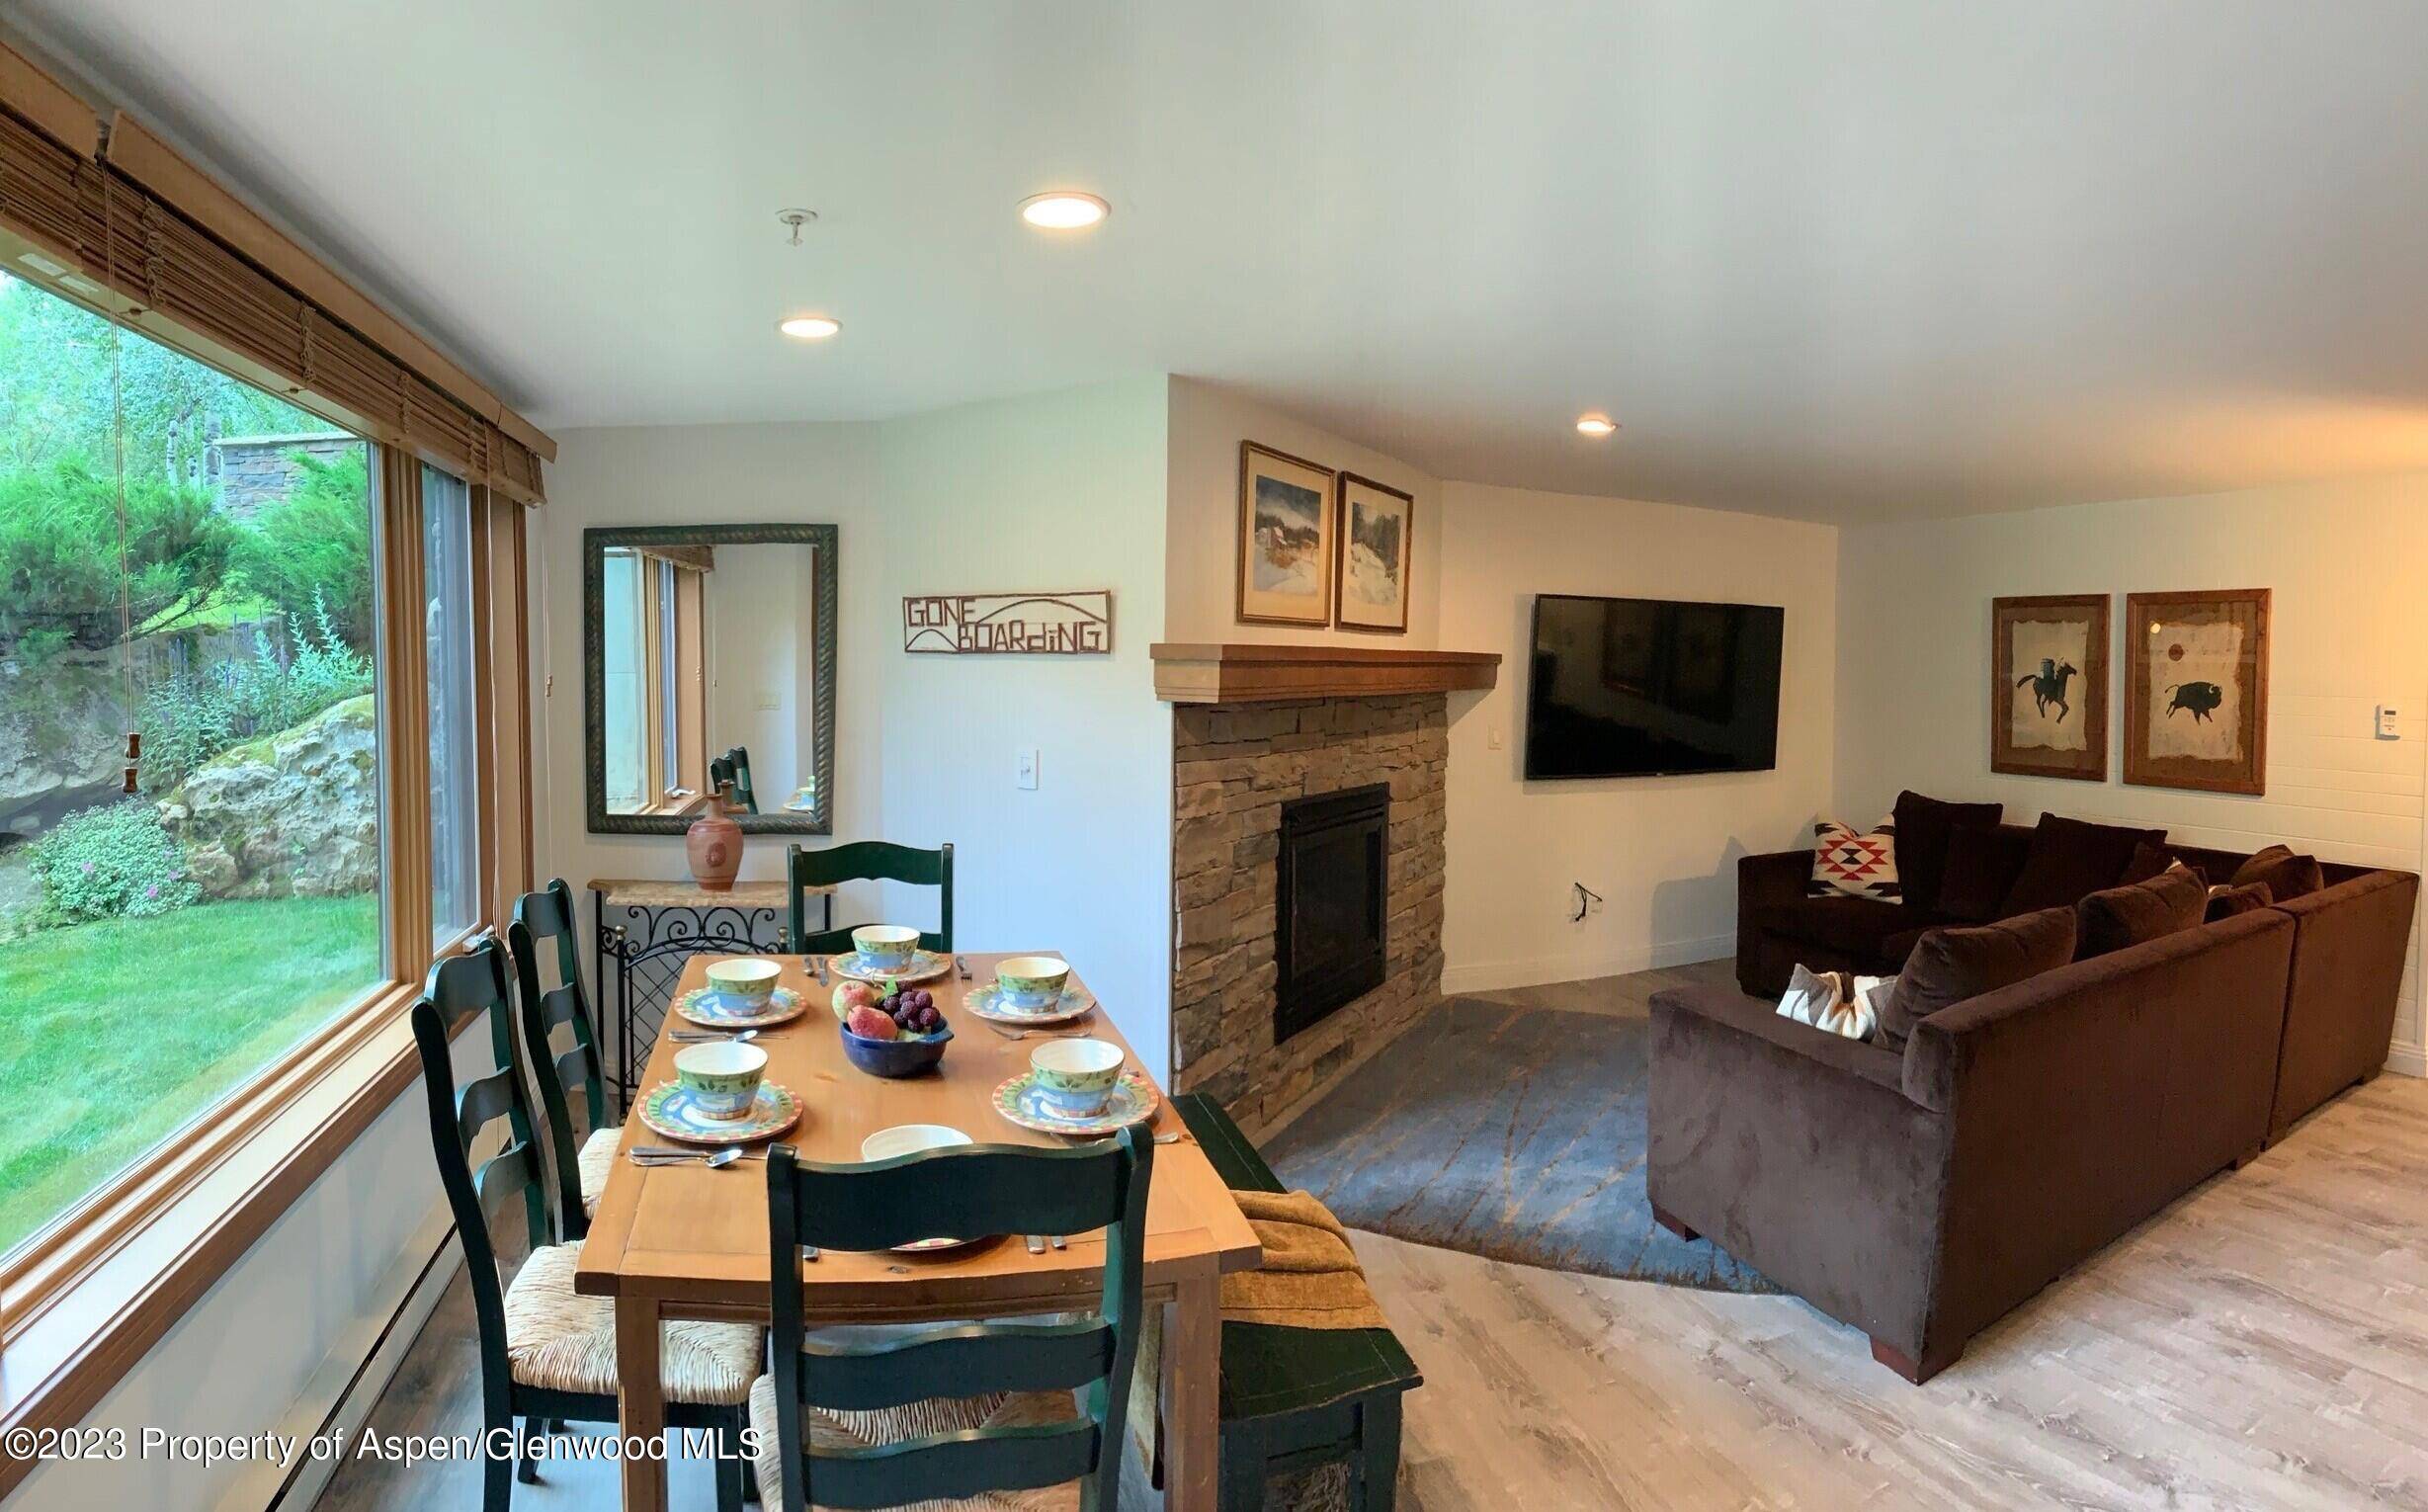 Here is the ideal retreat in Snowmass a perfect haven to call home.